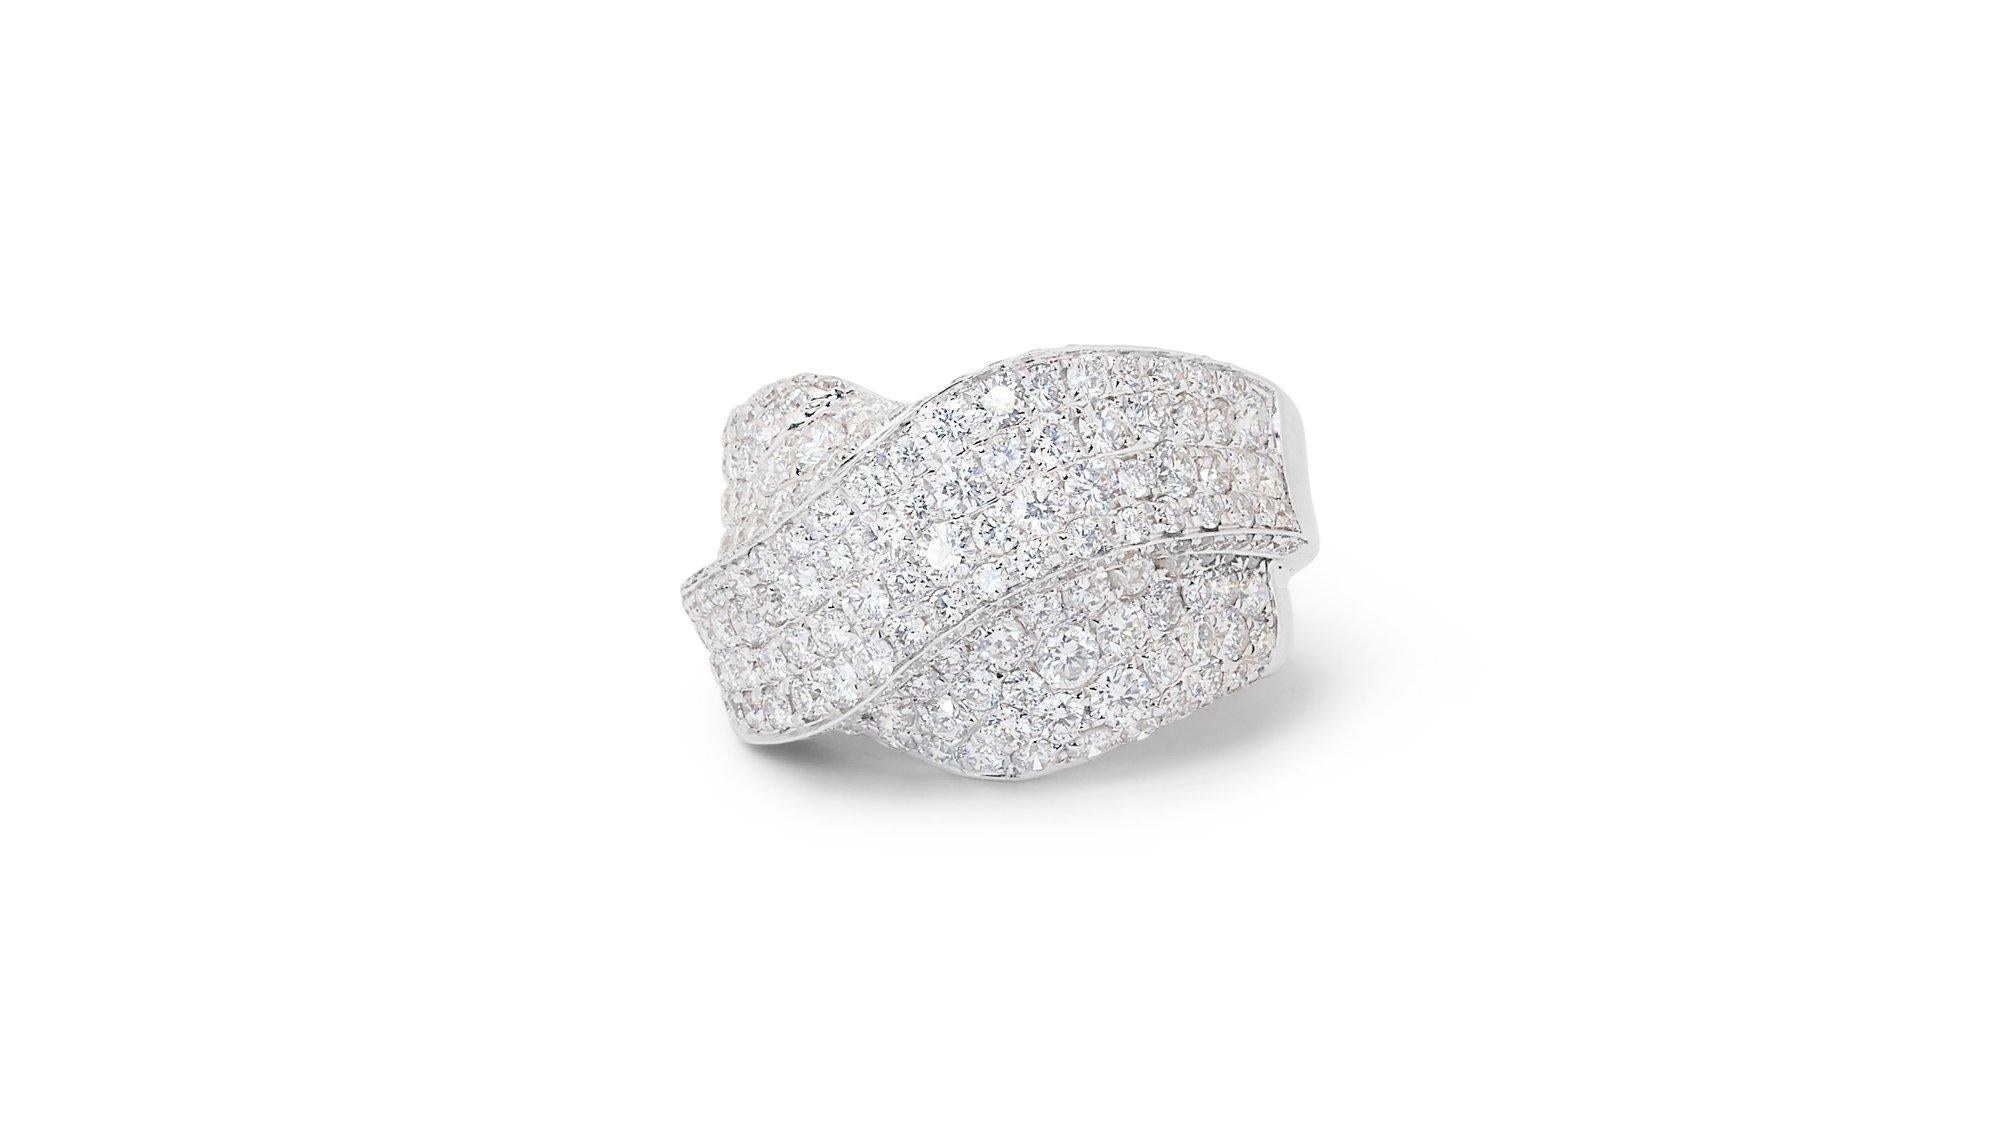 A beautiful Ring with a dazzling 4.5 carat round brilliant diamonds. The jewelry is made of 18K White Gold with a high quality polish. It comes with an IGI certificate and a fancy jewelry box.

220 diamonds main stone of 4.5 carat
cut: round